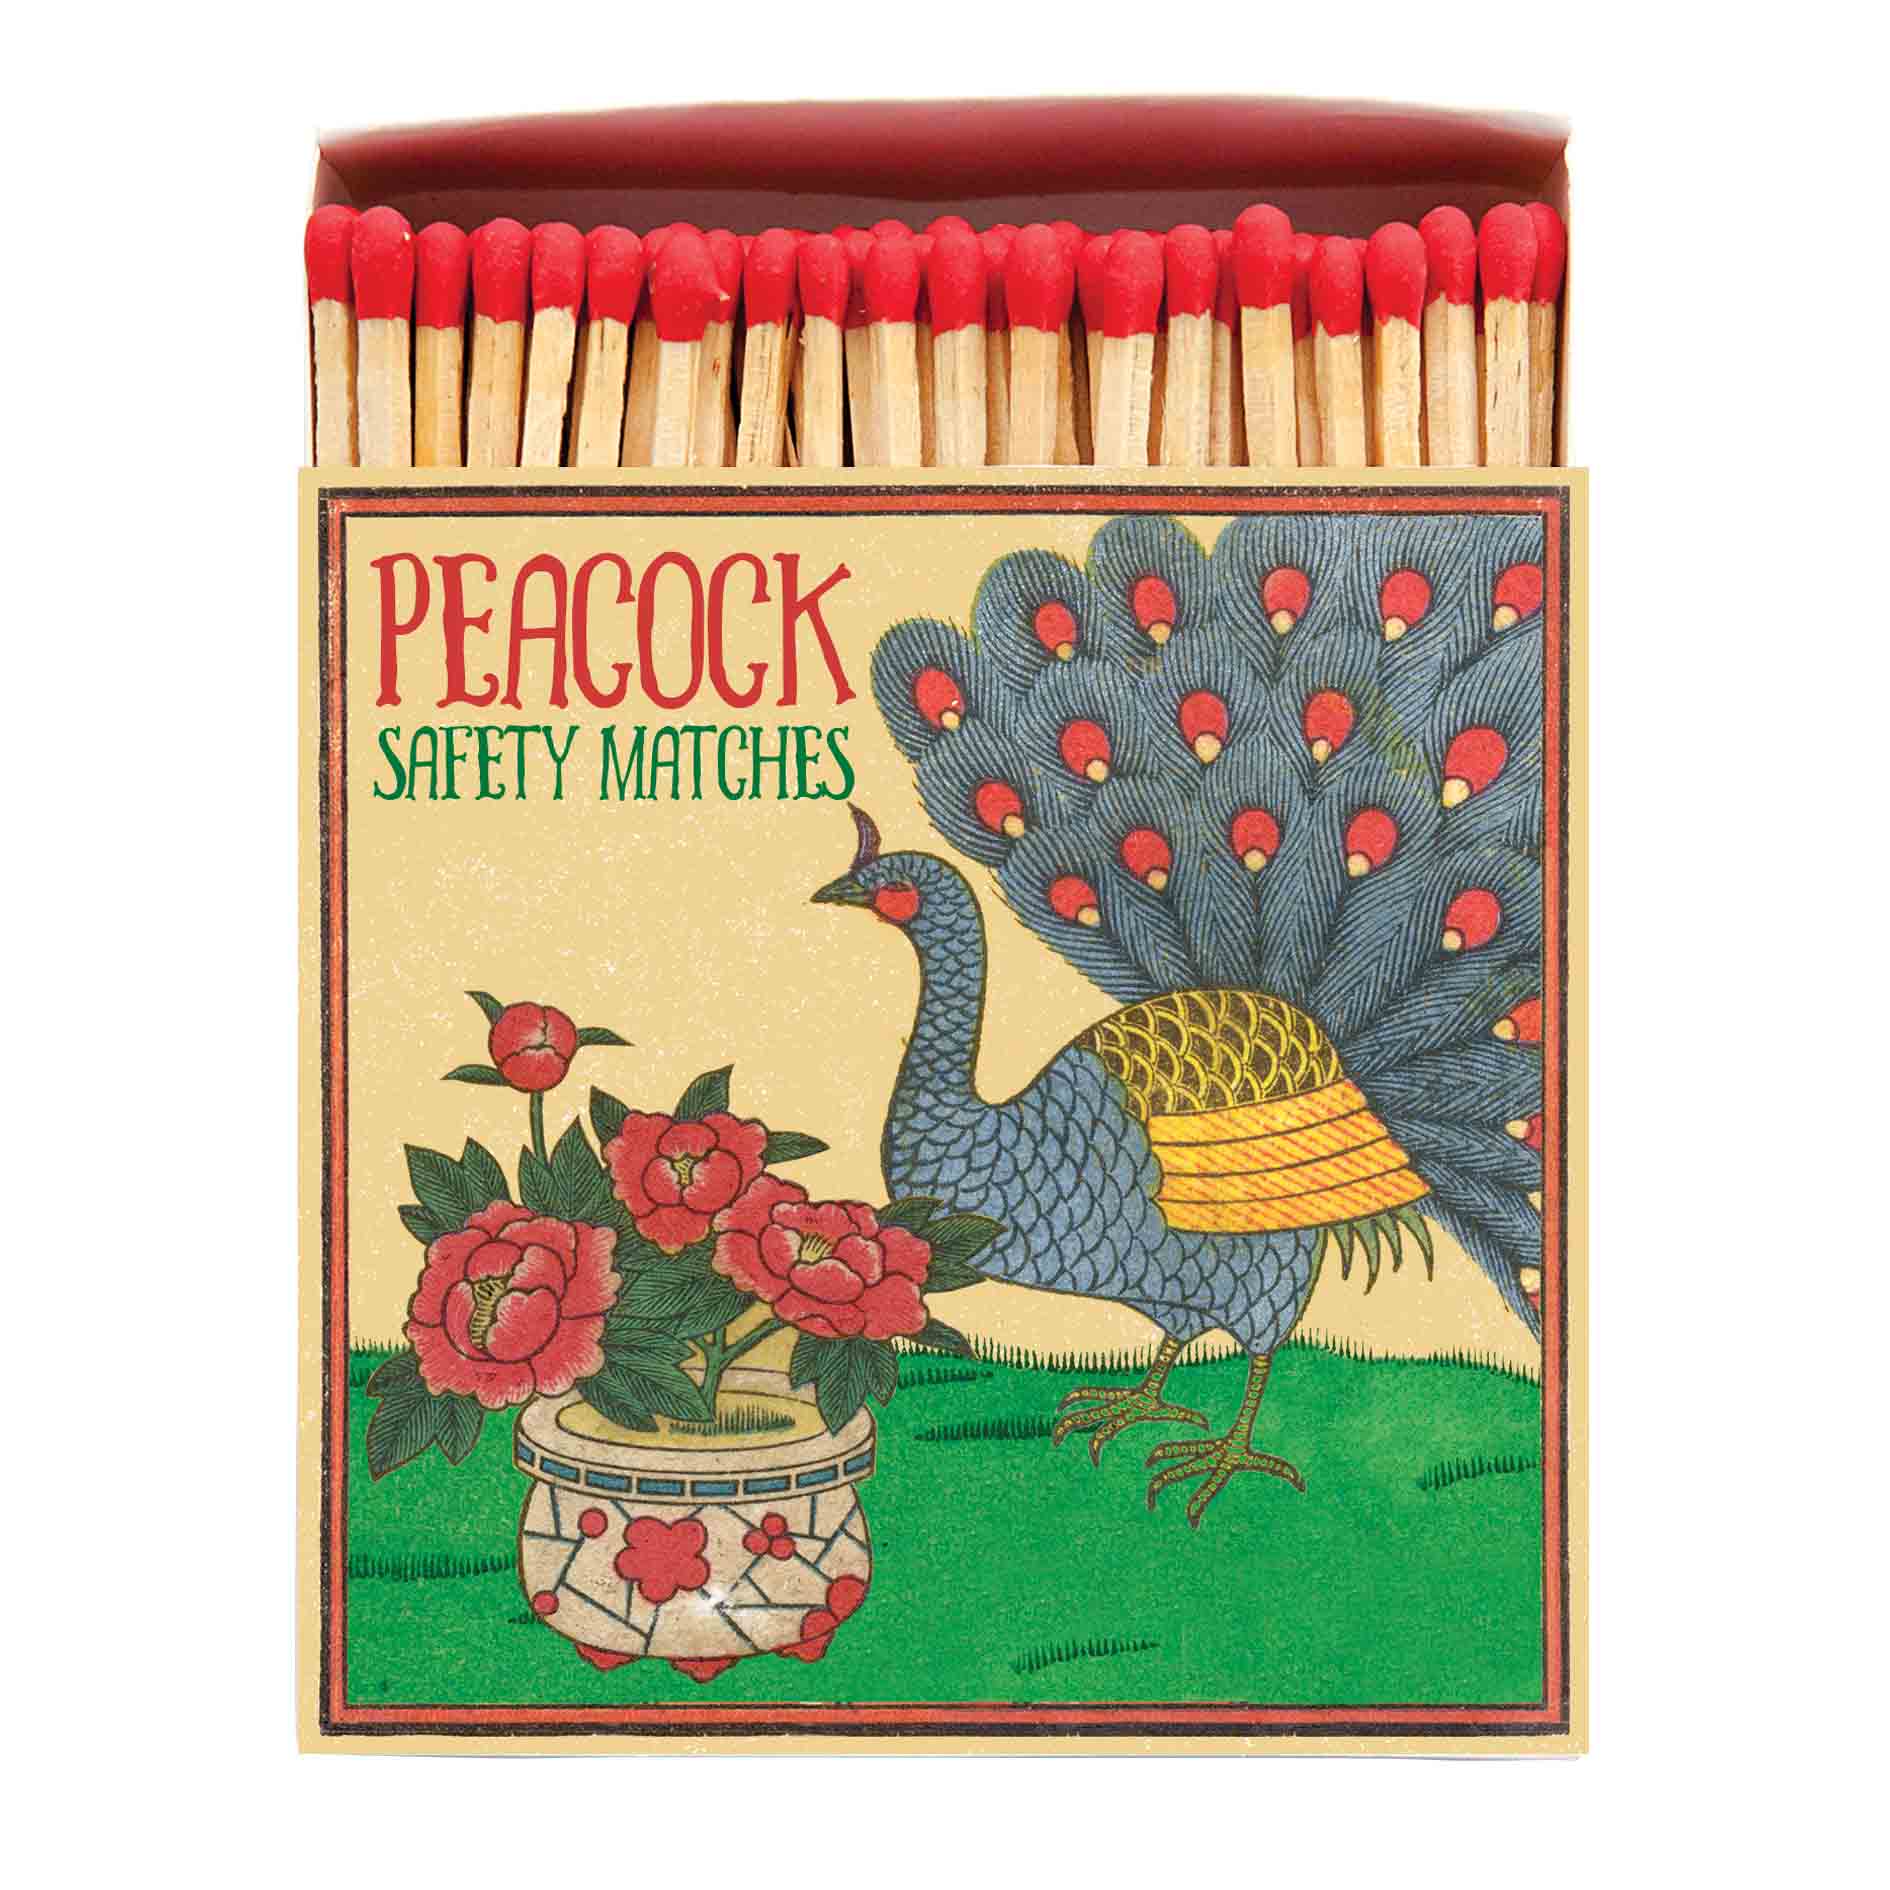 luxury matches in a colourful box with a peacock illustration 